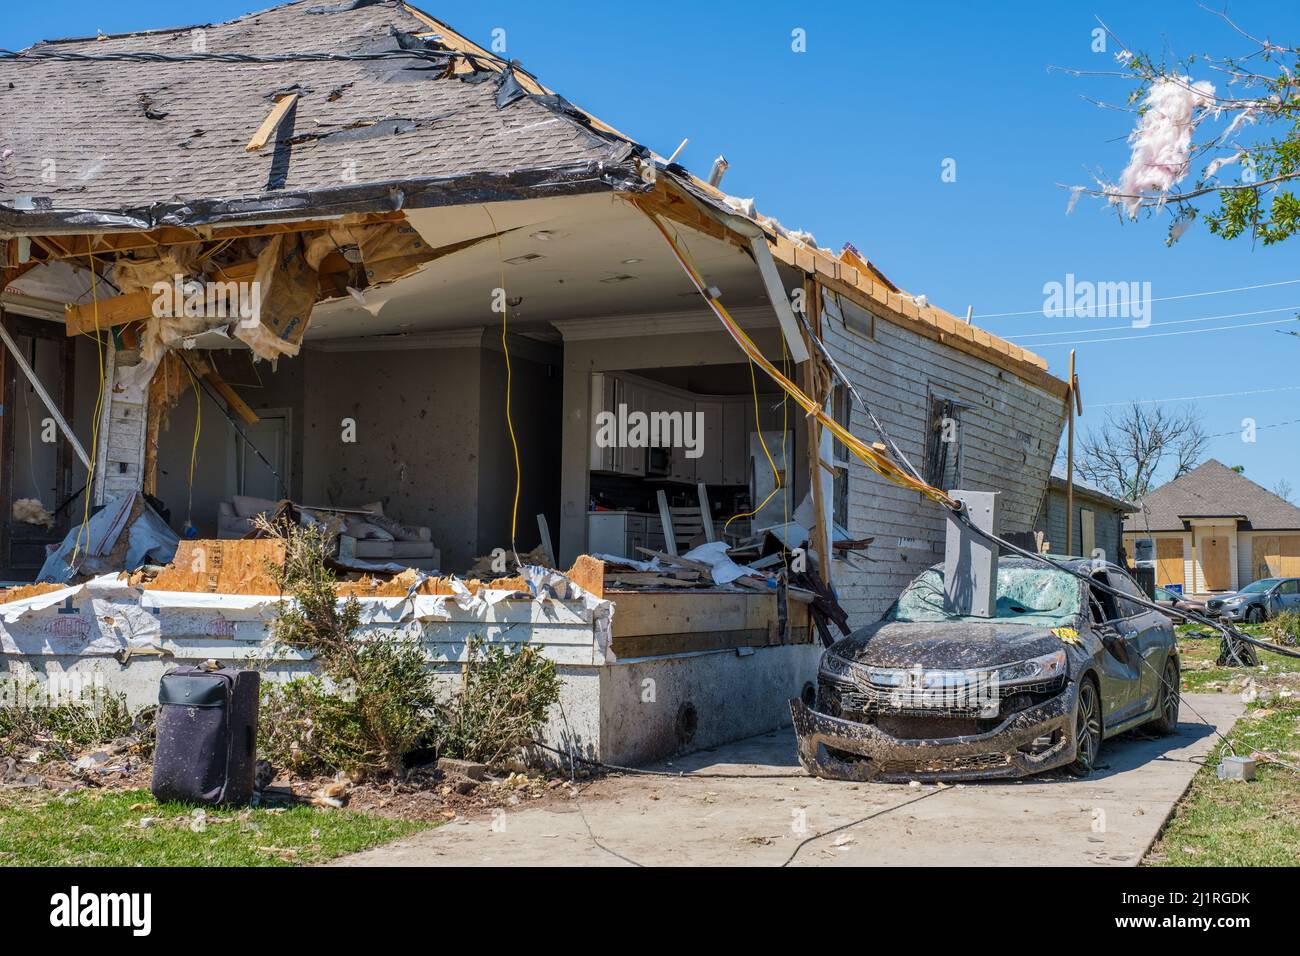 ARABI, LA, USA - MARCH 26, 2022: Roof mangled, front of house torn off and circuit panel landed on the windshield after the tornado of March 22, 2022 Stock Photo